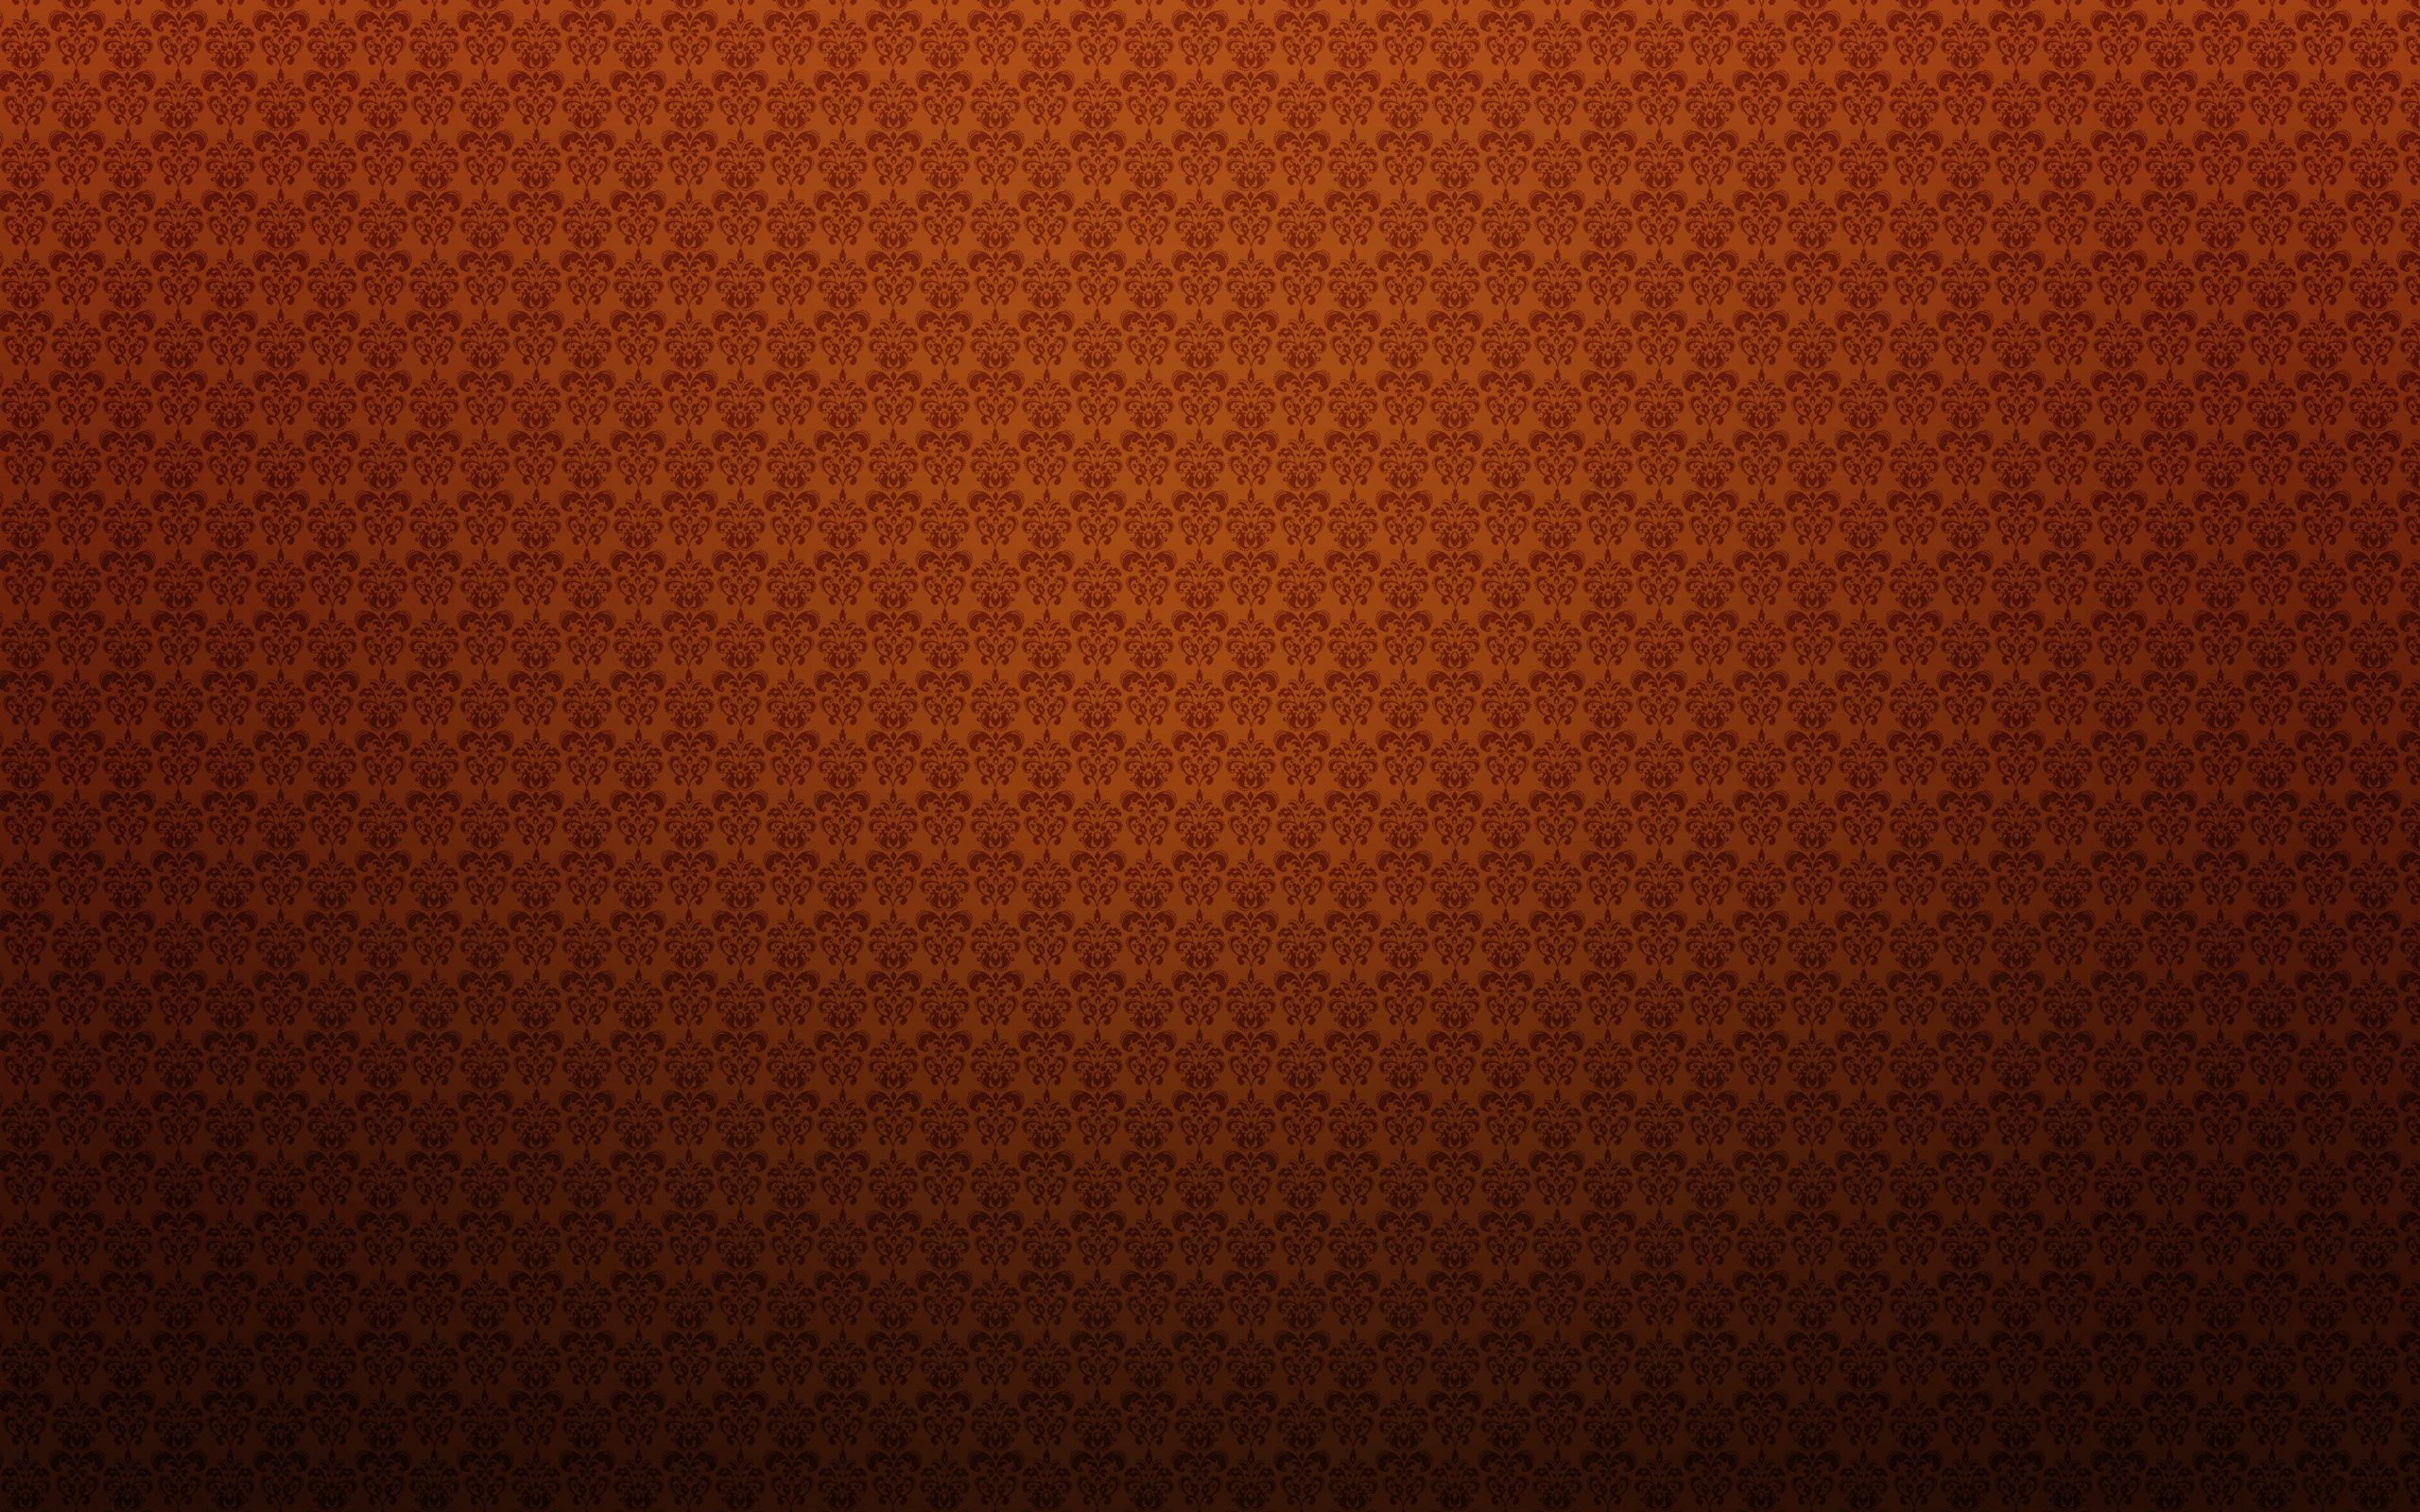 New Lock Screen Wallpapers background, light coloured, bright, textures